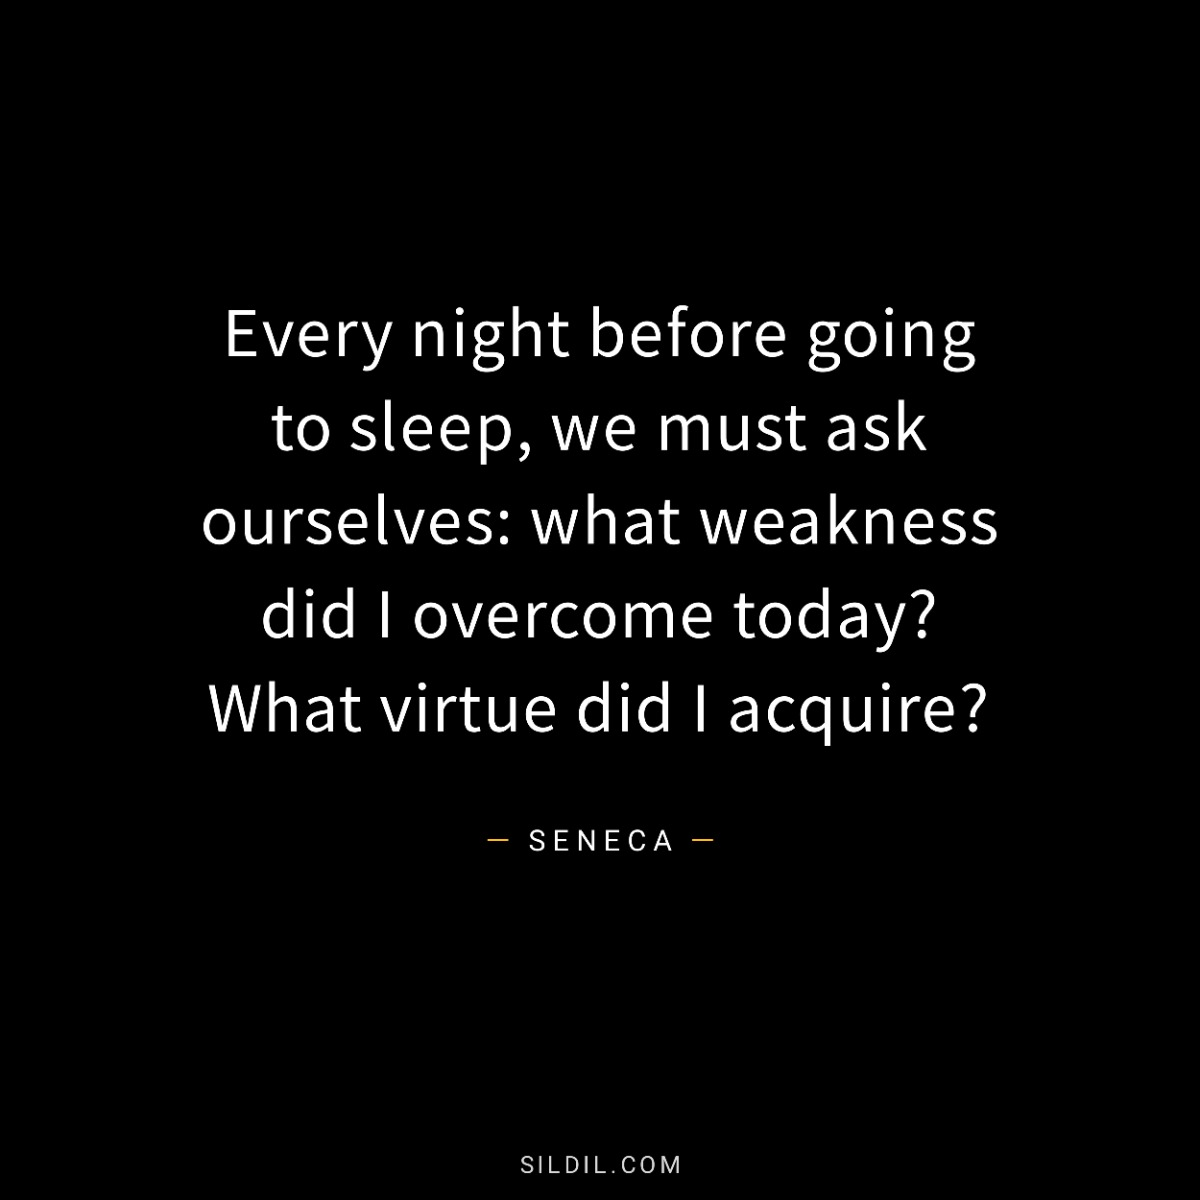 Every night before going to sleep, we must ask ourselves: what weakness did I overcome today? What virtue did I acquire?